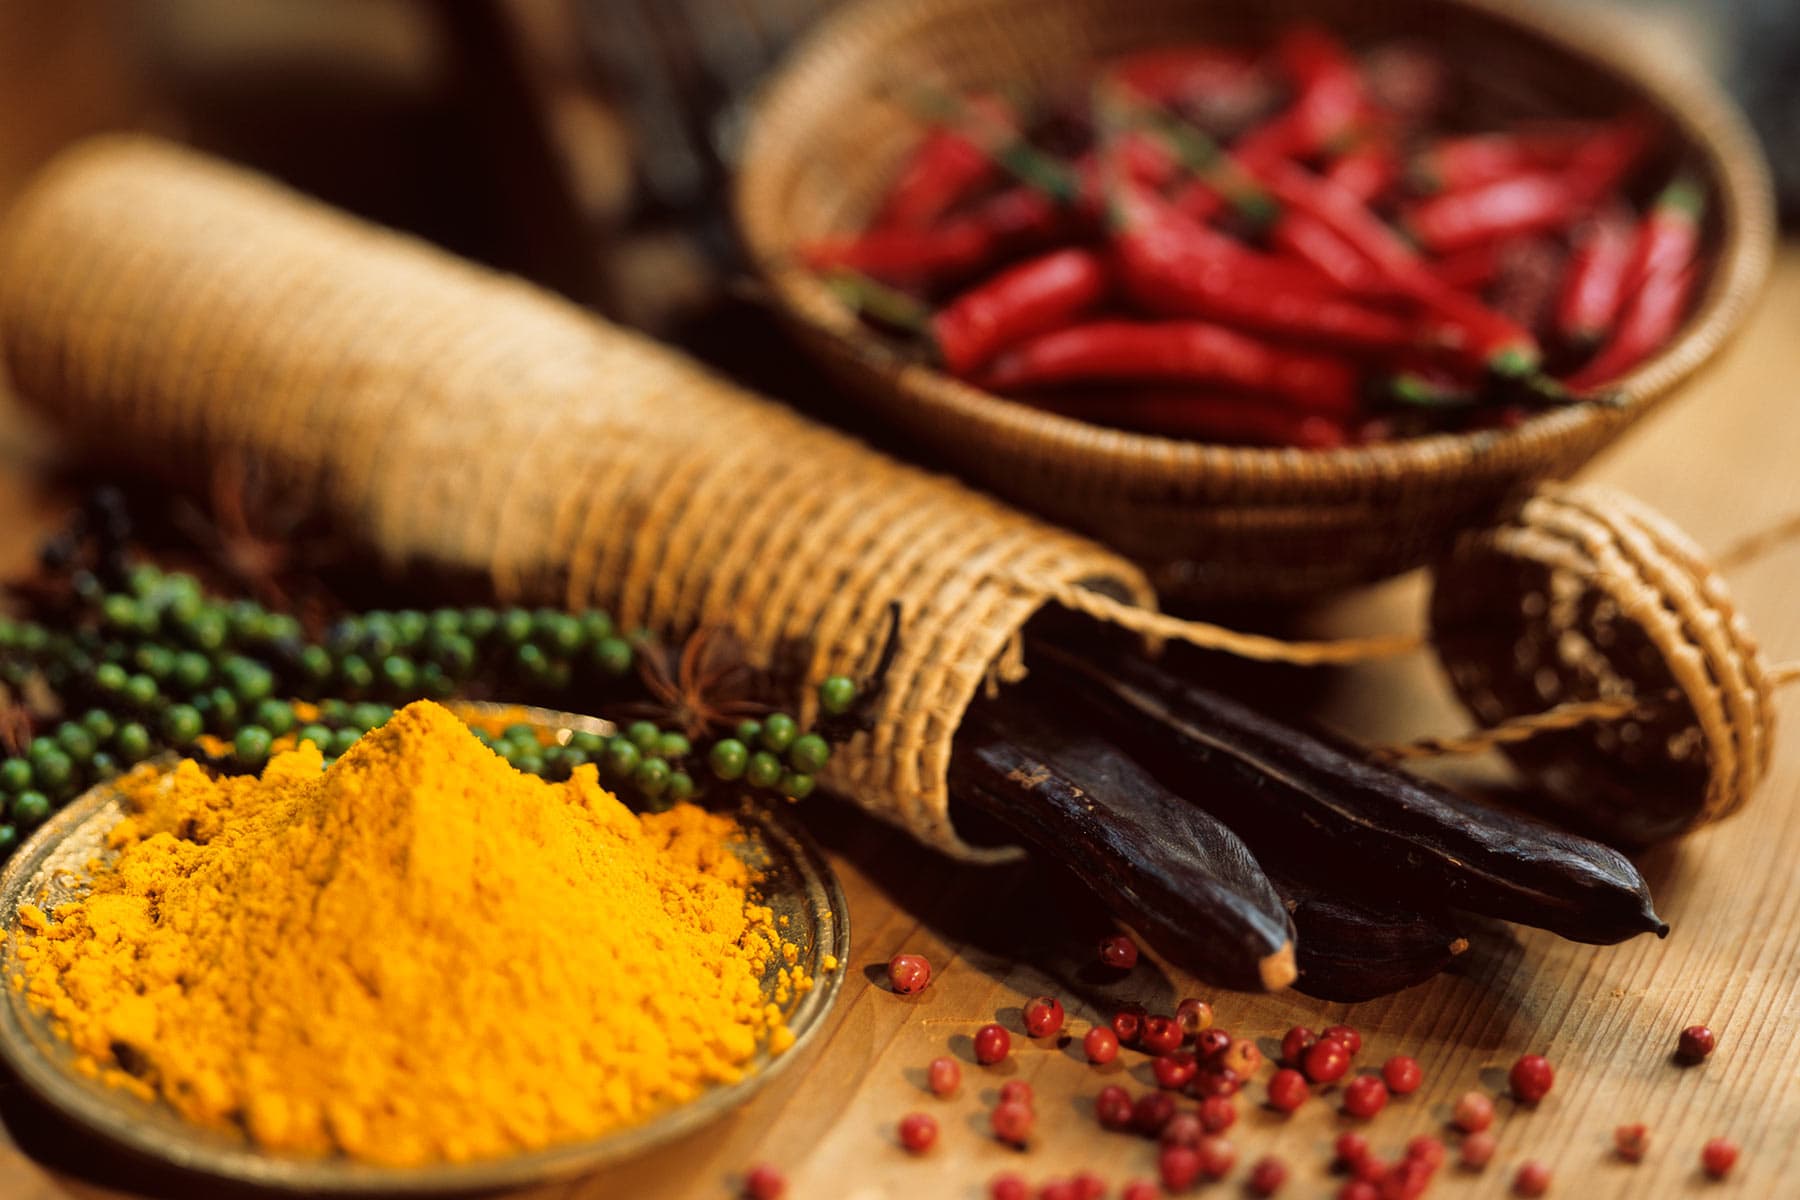 Hot Stuff: Spicy Foods Can't Harm You, Can They?